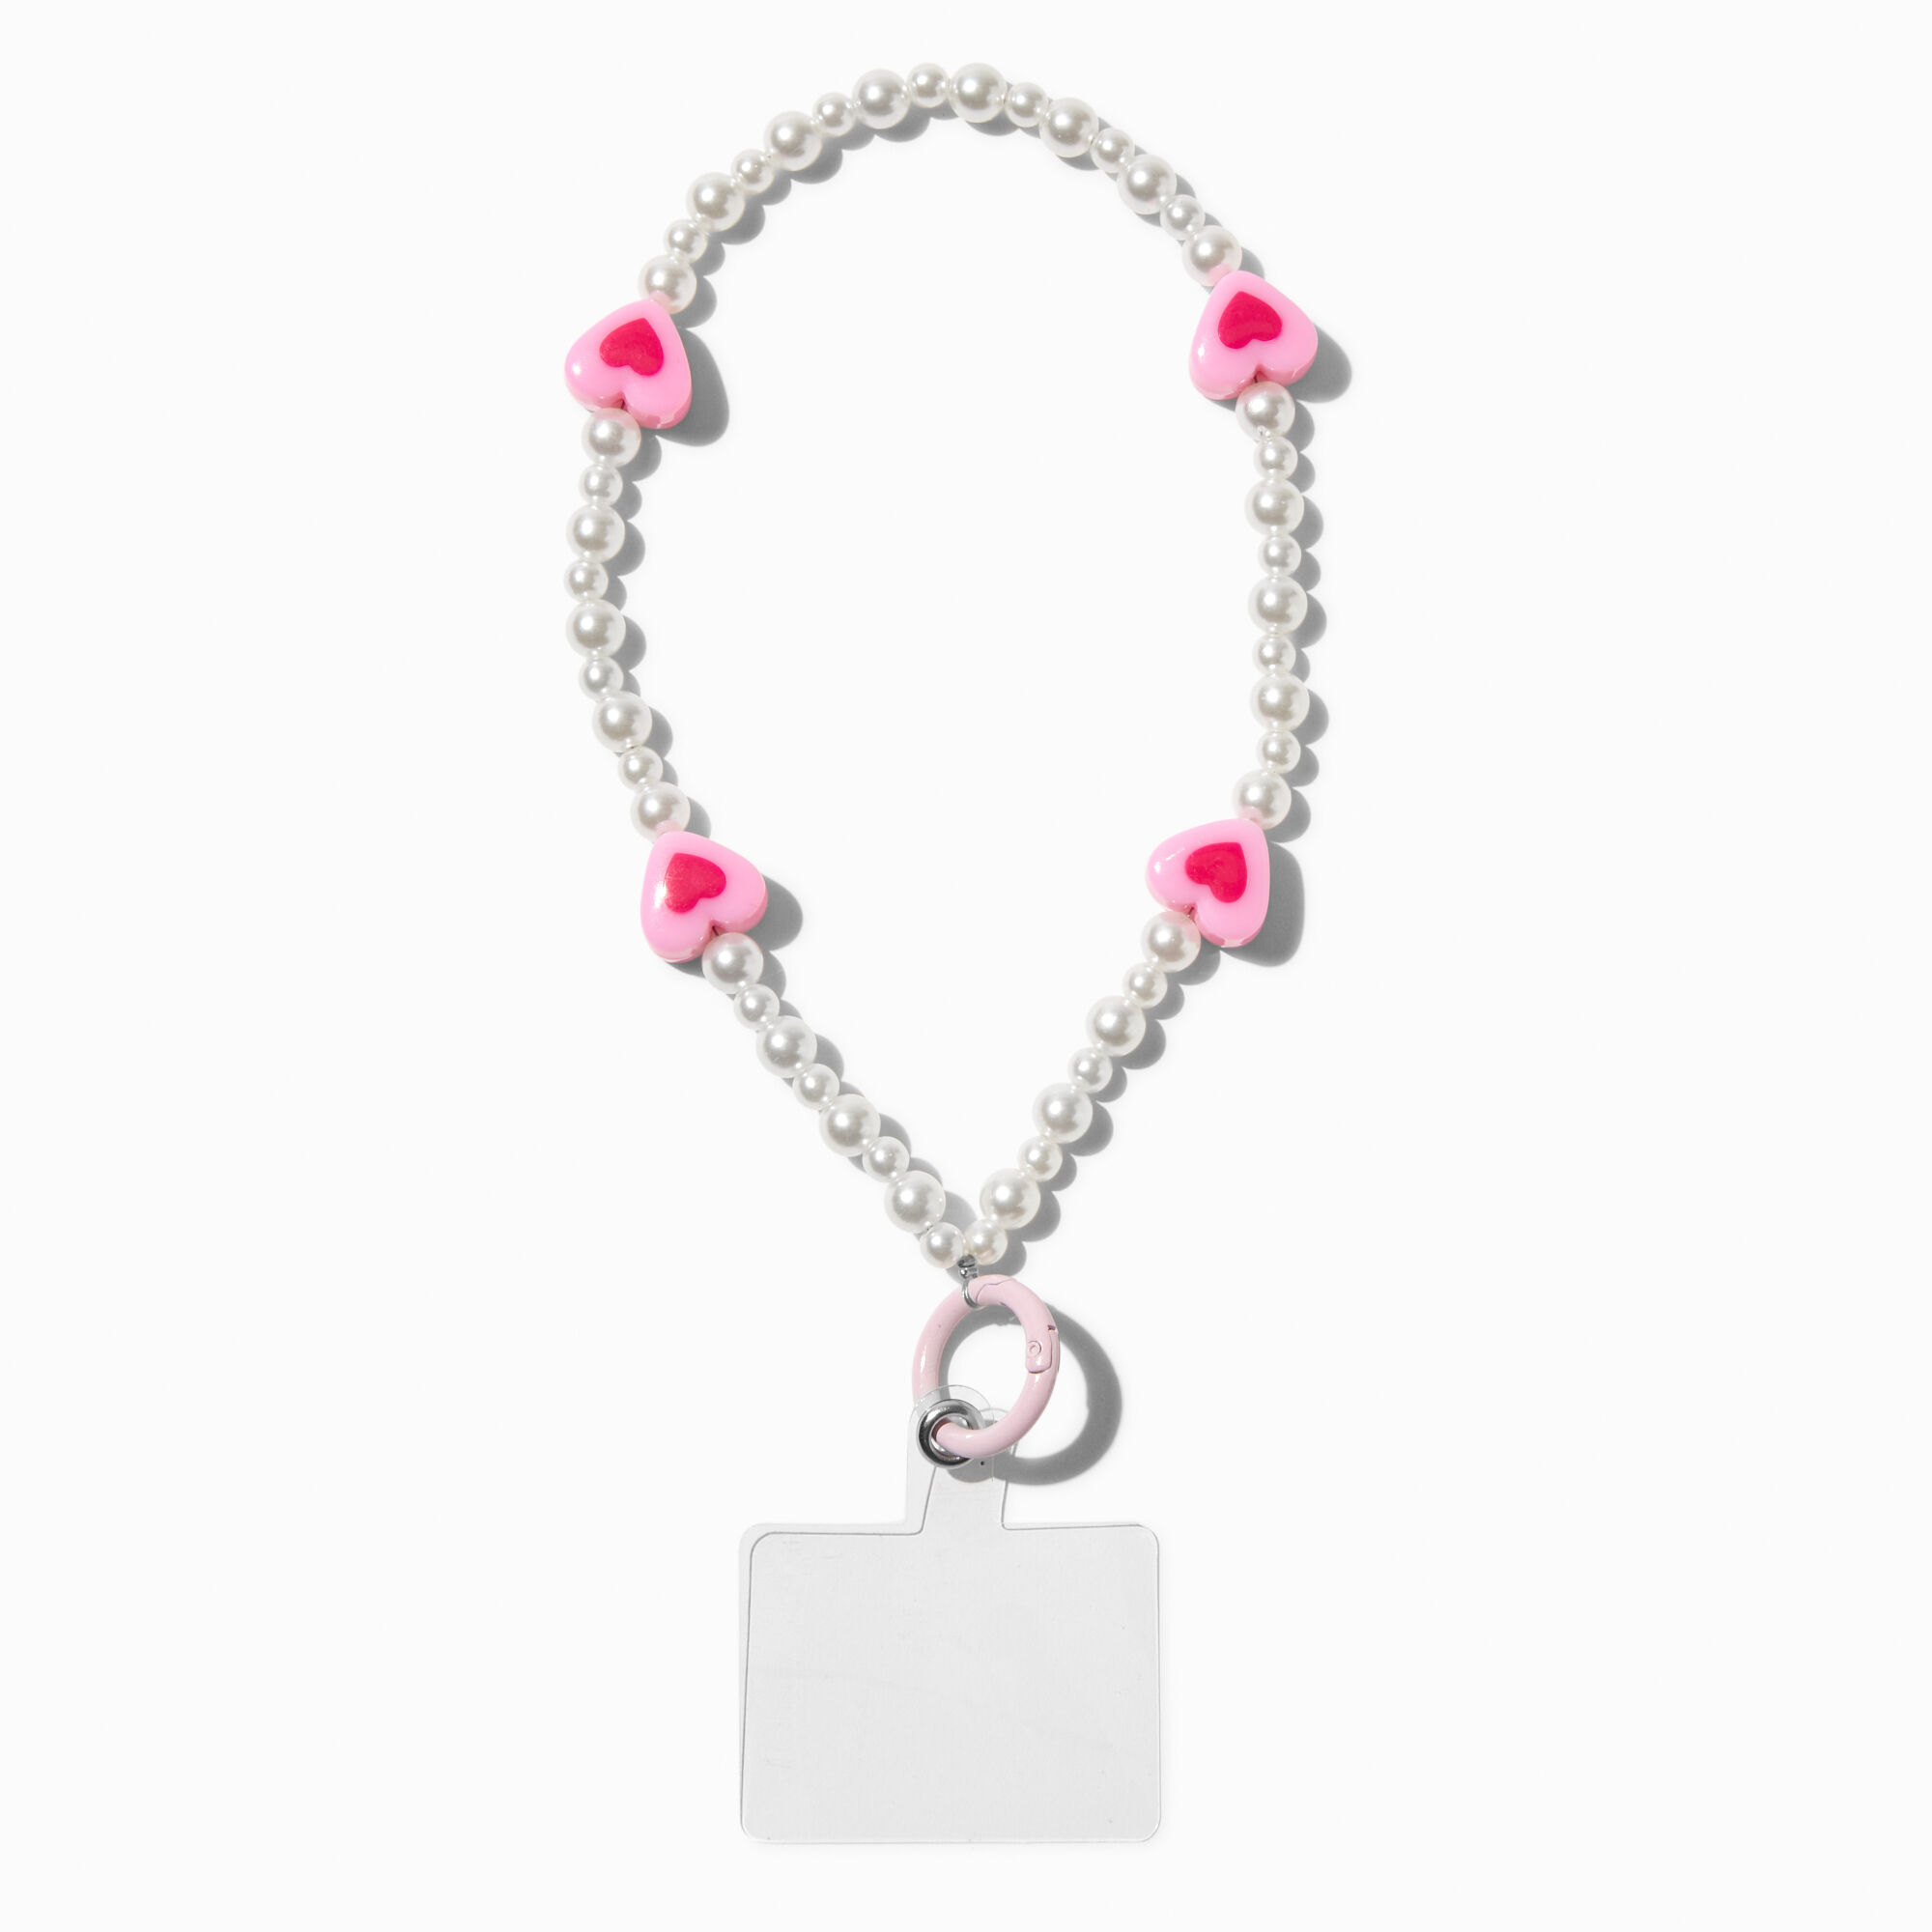 View Claires Heart Pearl Beaded Phone Wrist Strap Pink information